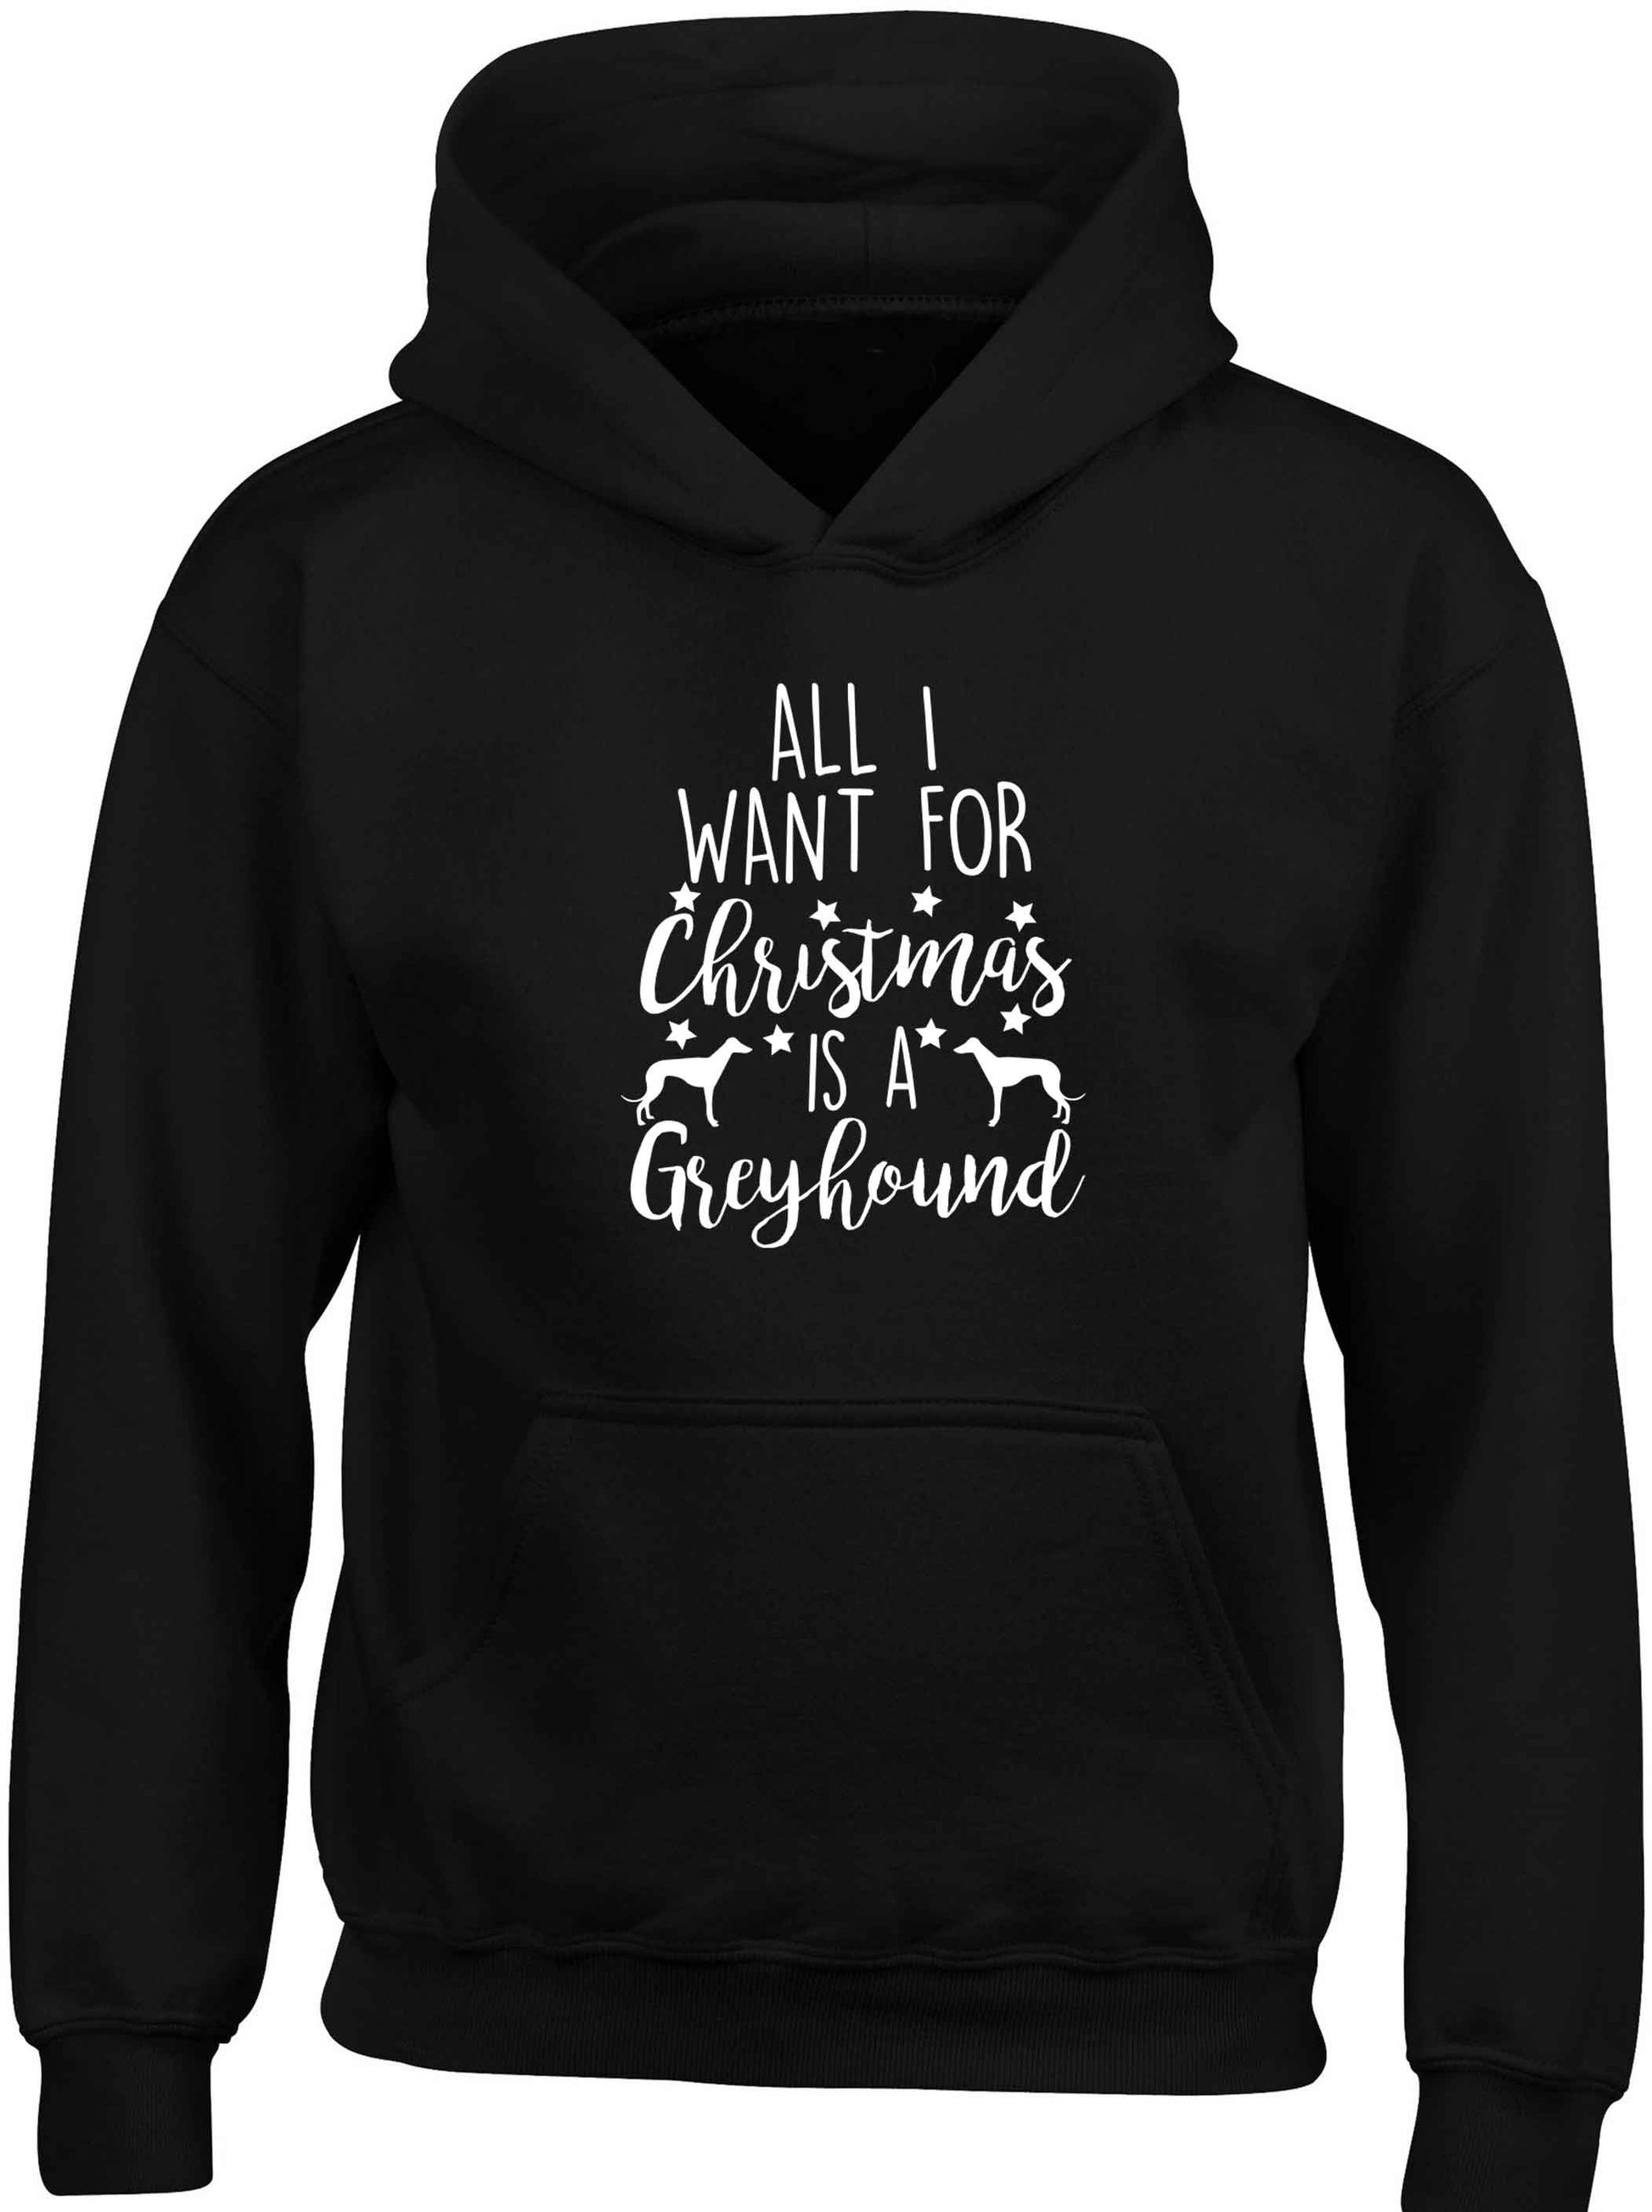 All I want for Christmas is a greyhound children's black hoodie 12-13 Years